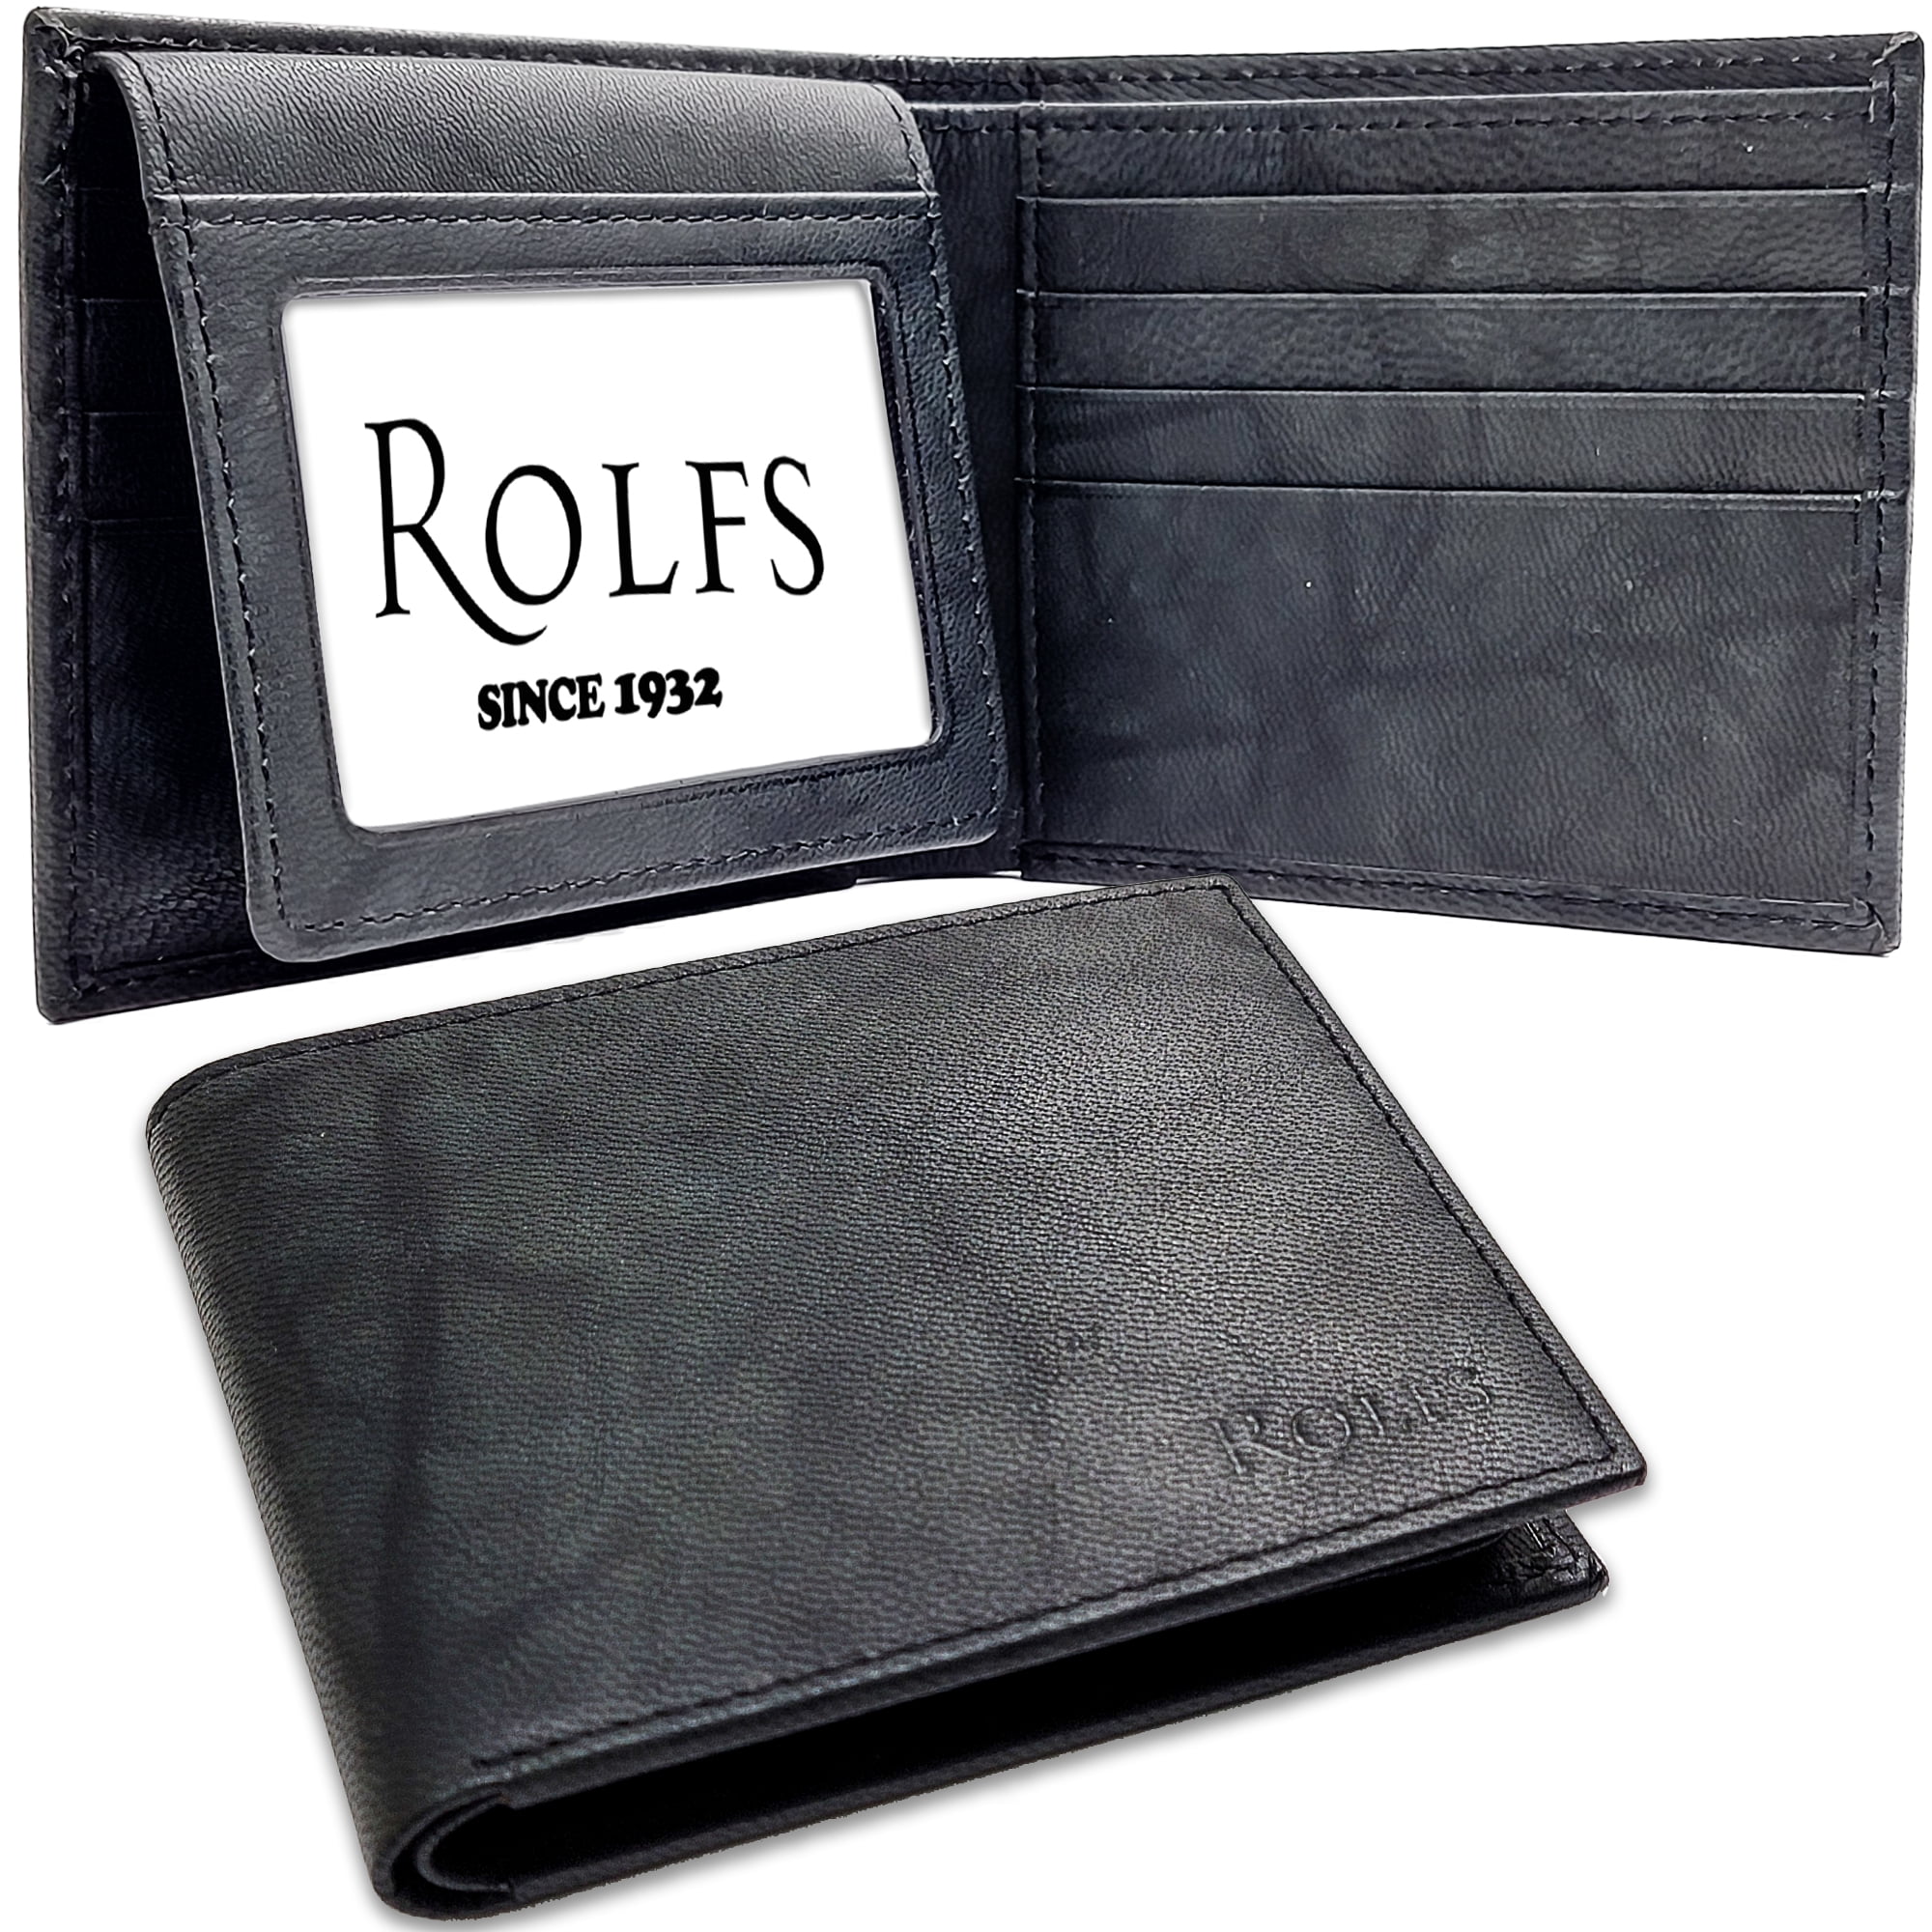 New Rolfs Leather Checkbook Cover Wallet Brown Card holder in and out ID Windows 